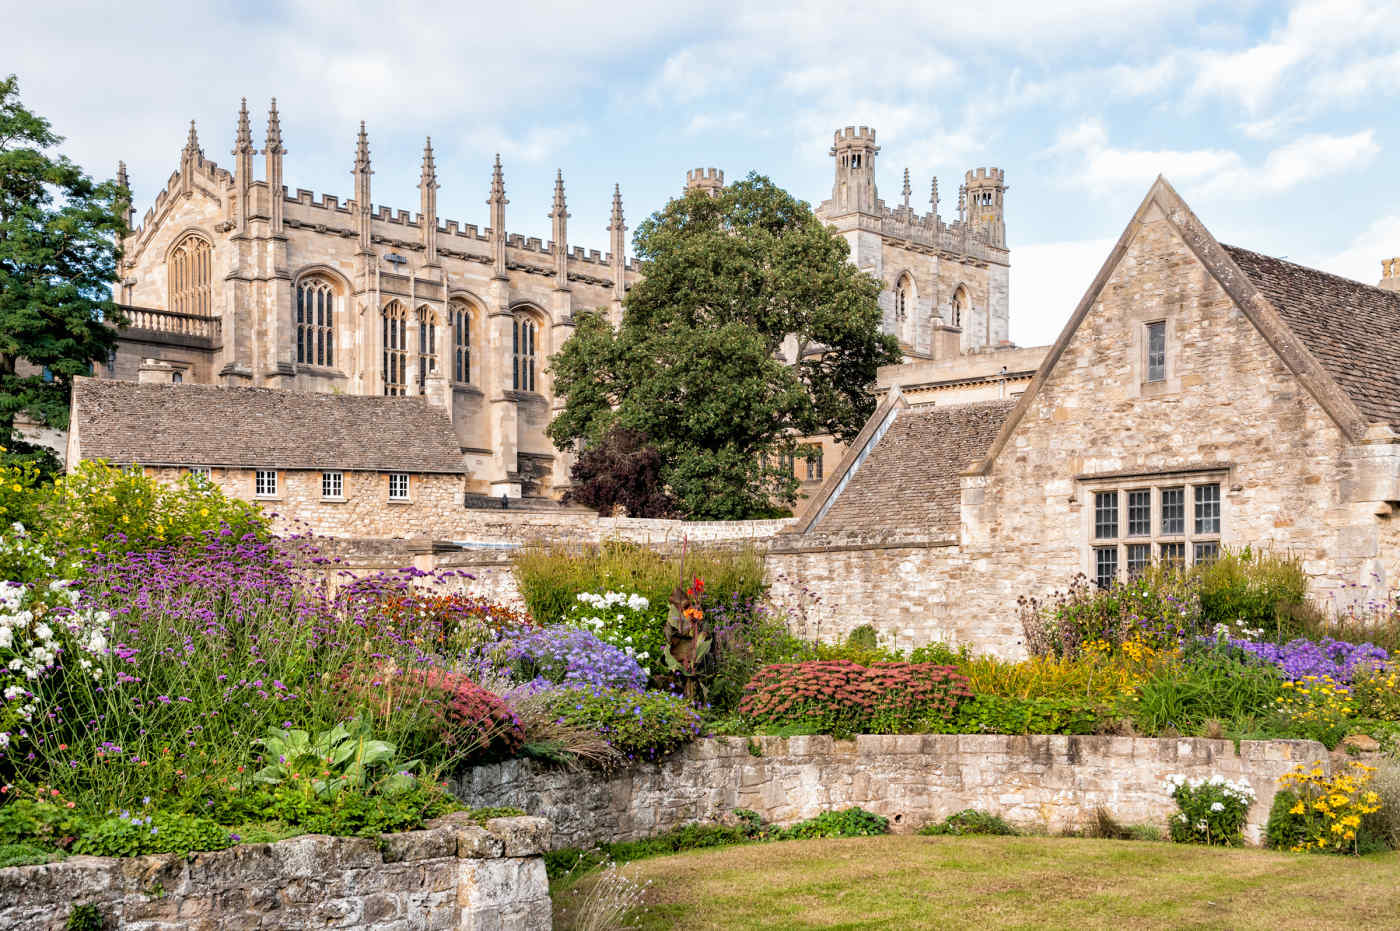 Christ Church College in Oxford, England